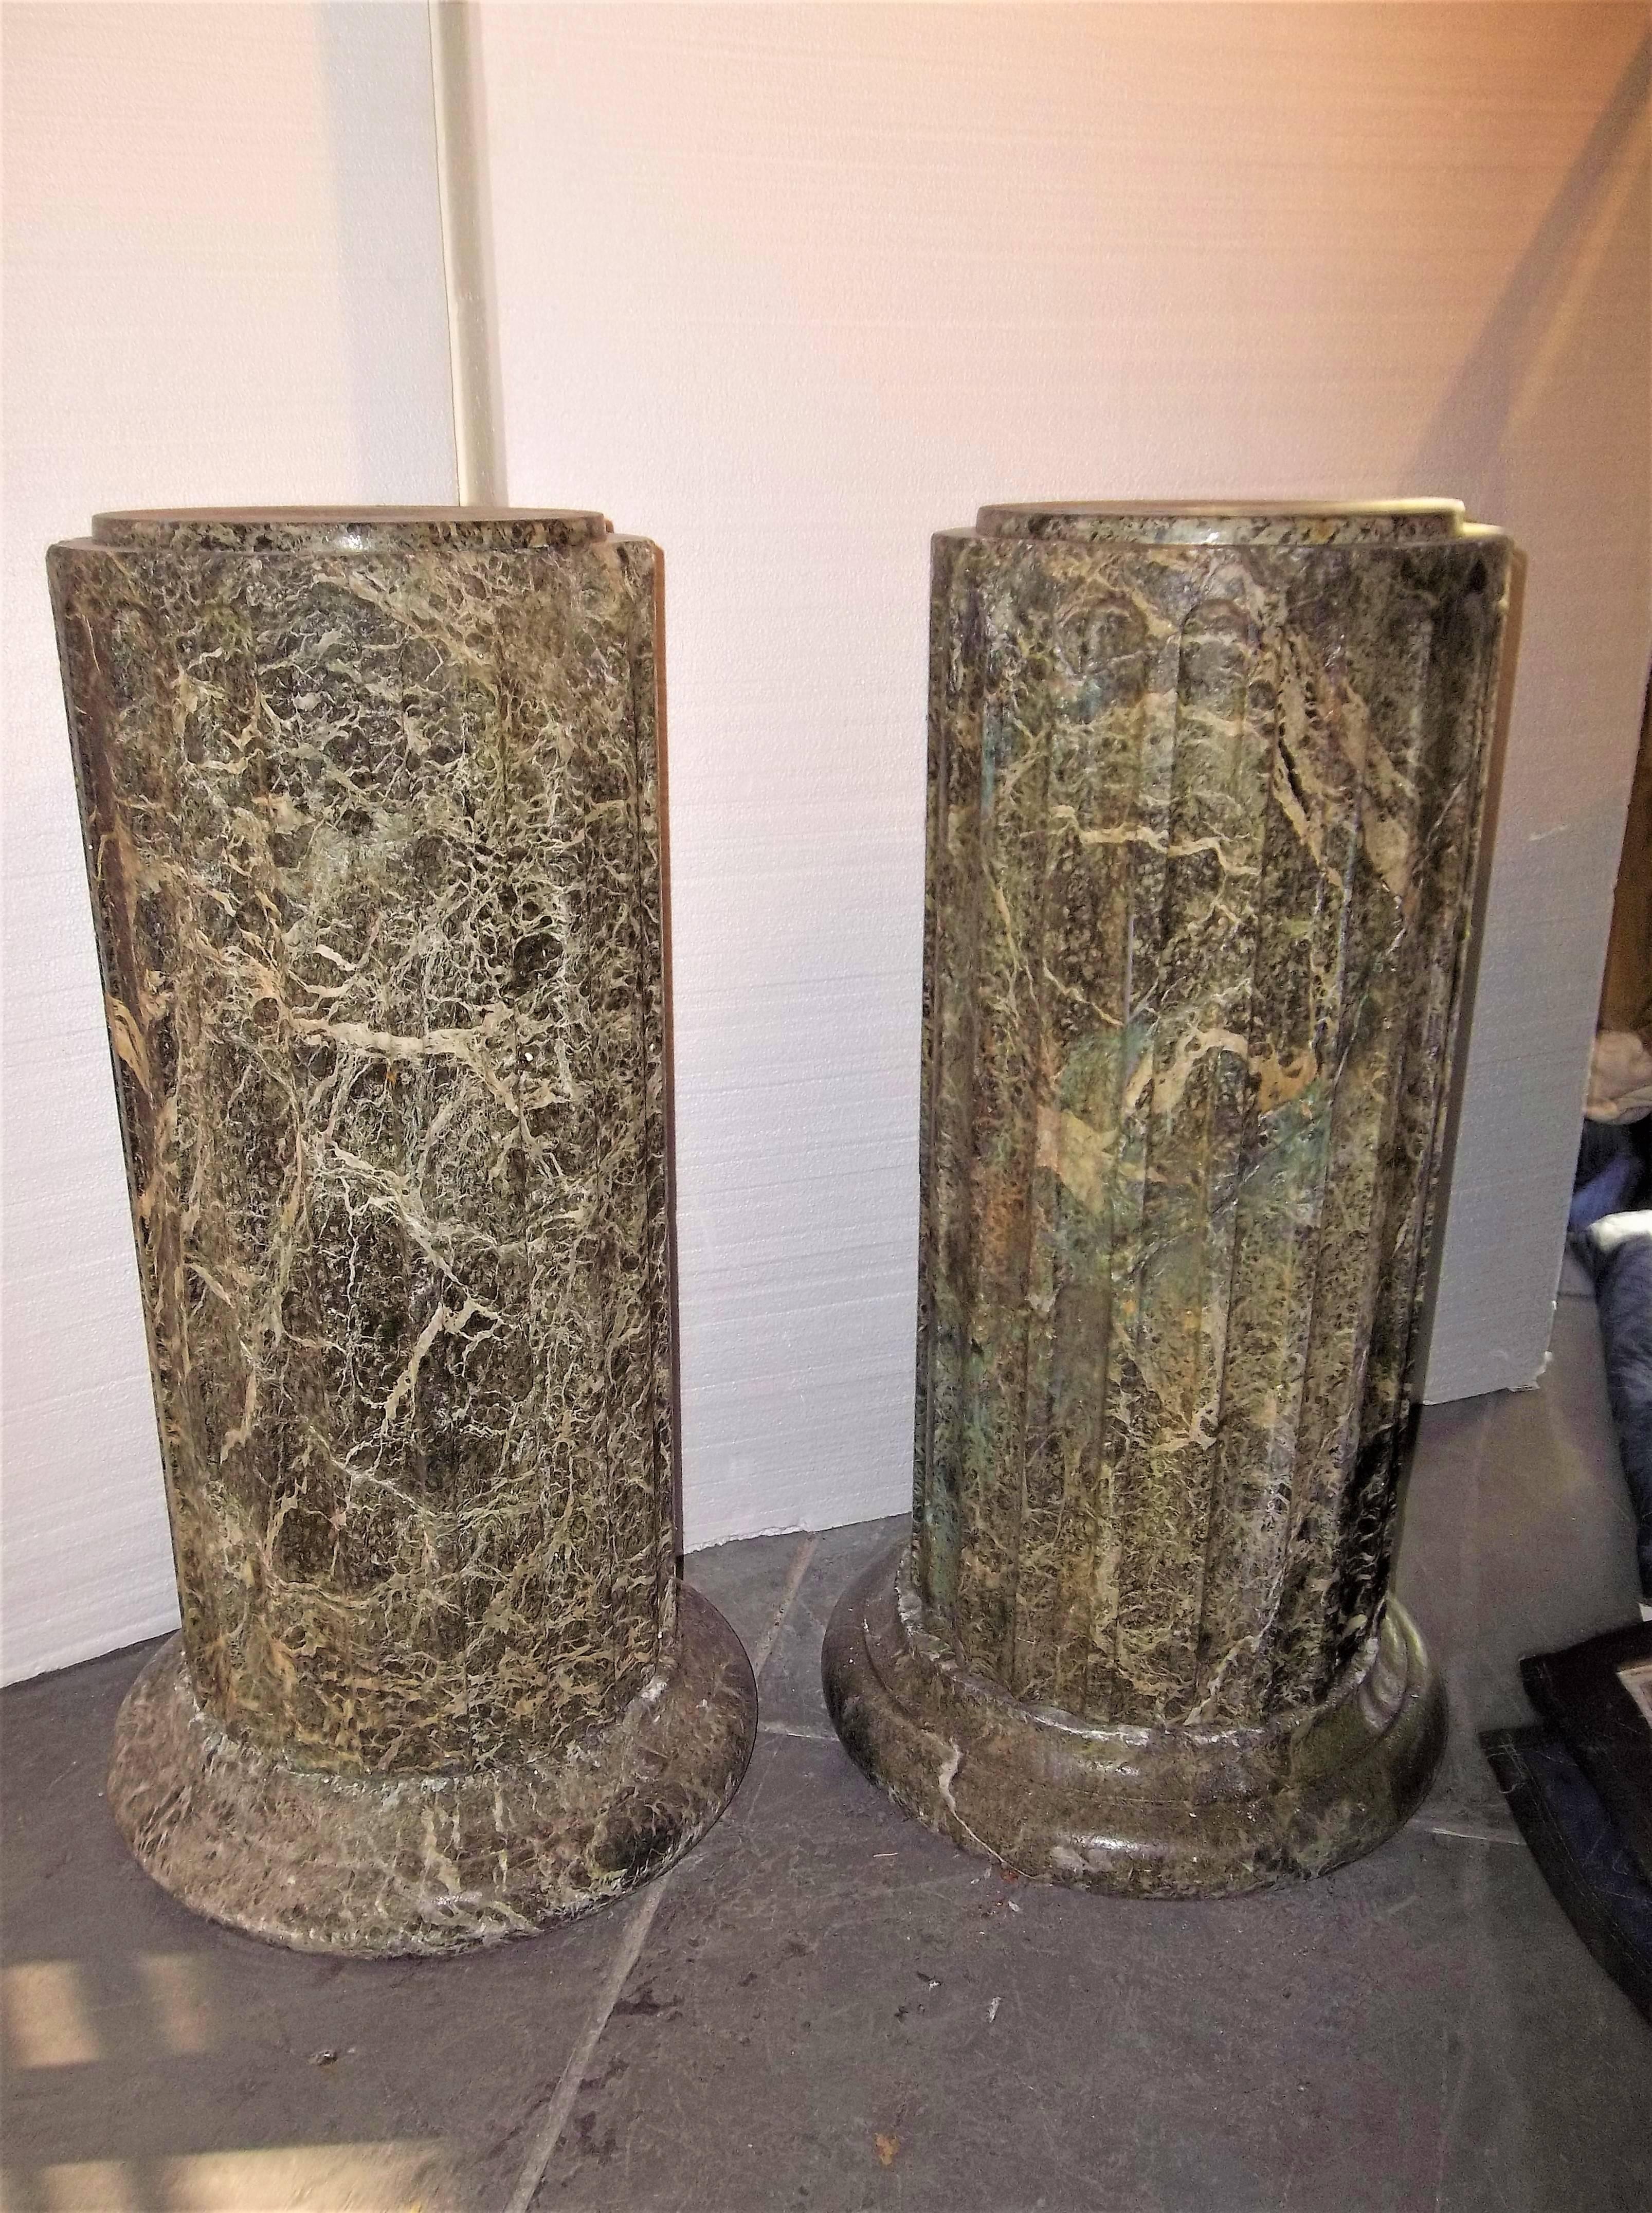 Pair of 18th century origin, each consisting of three parts; circular base fluted shaft and lid.
The green (Verde antico or Latin for ancient green) marble of heavily veined aggregate. The bases and shafts hand hewn. Each lid probably later with